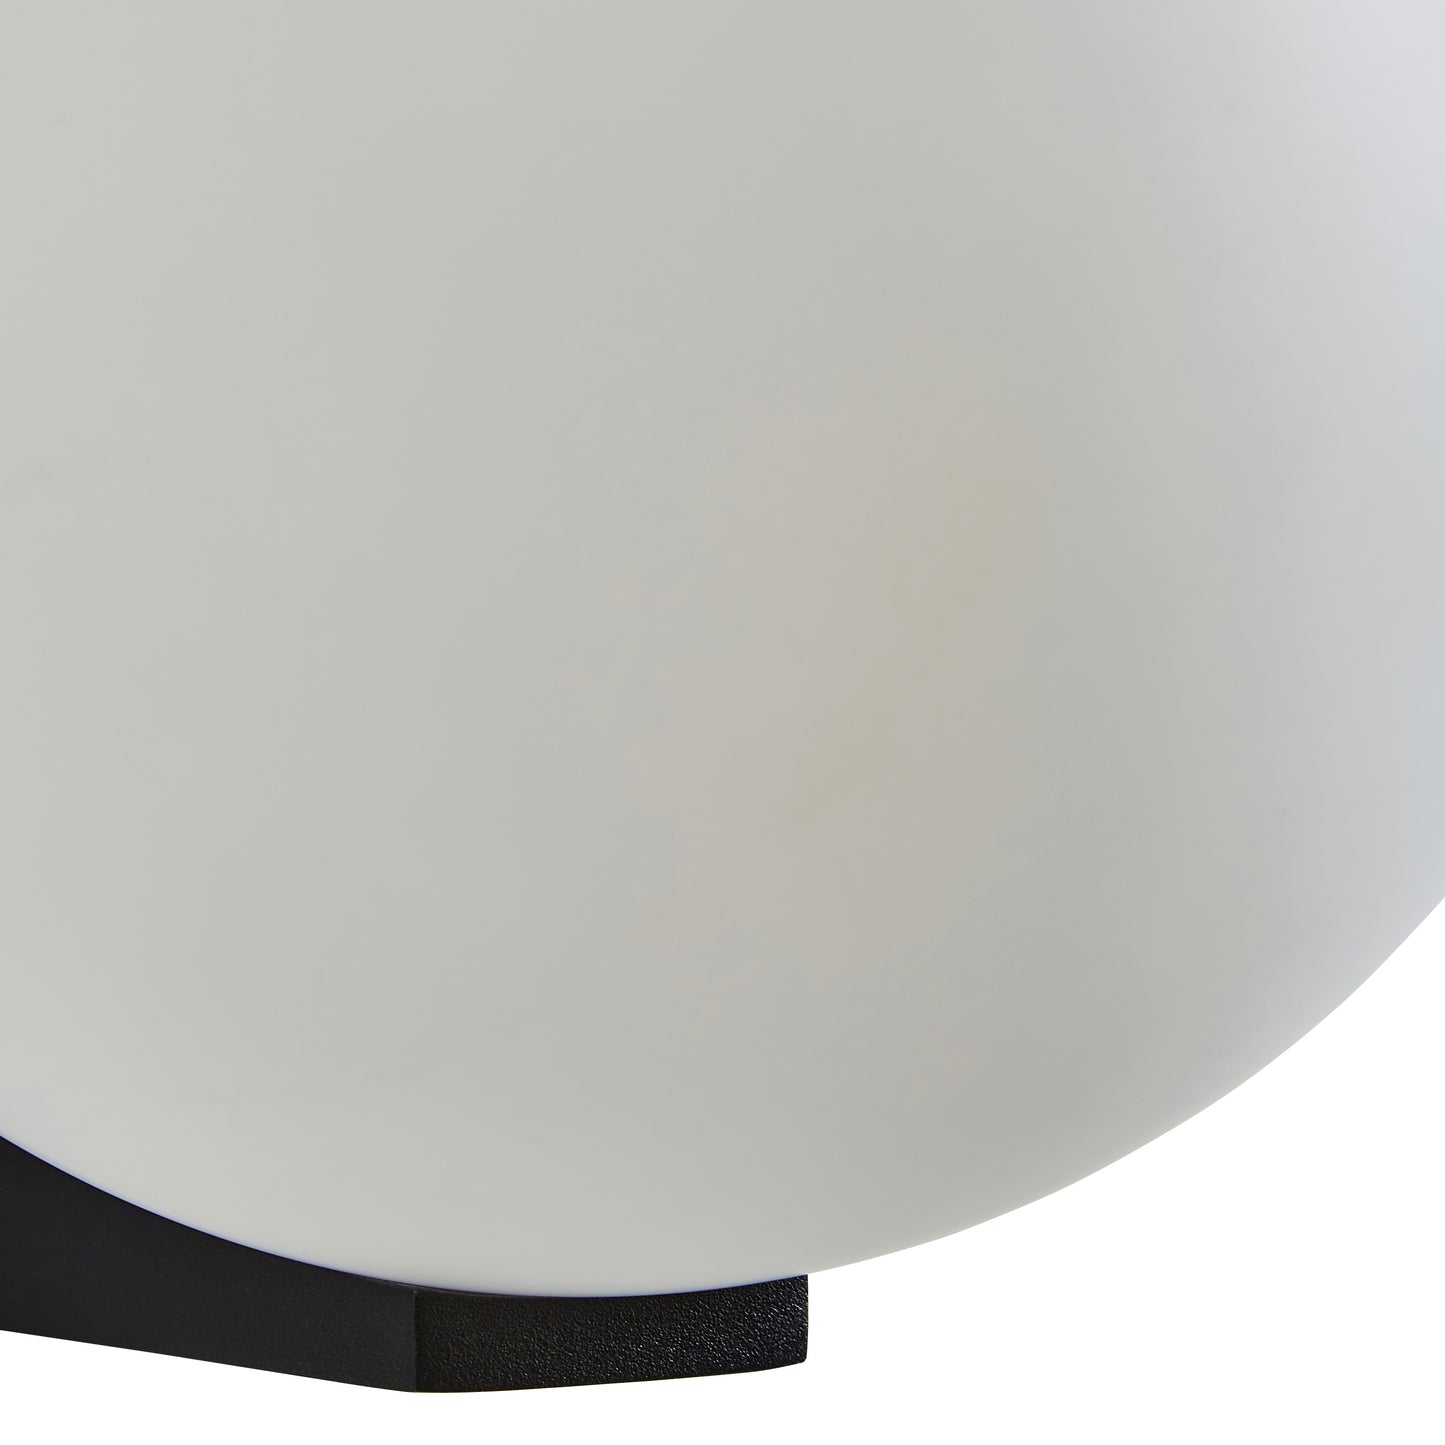 Our Jasper black wall light with white opal glass diffuser adds a touch of opulence and luxury to the walls of your home. The modern light fitting would look perfect installed next to a mirror, on corridors or hallways, bedside and living rooms, this light also has IP44 protection making it suitable for all bathrooms. 